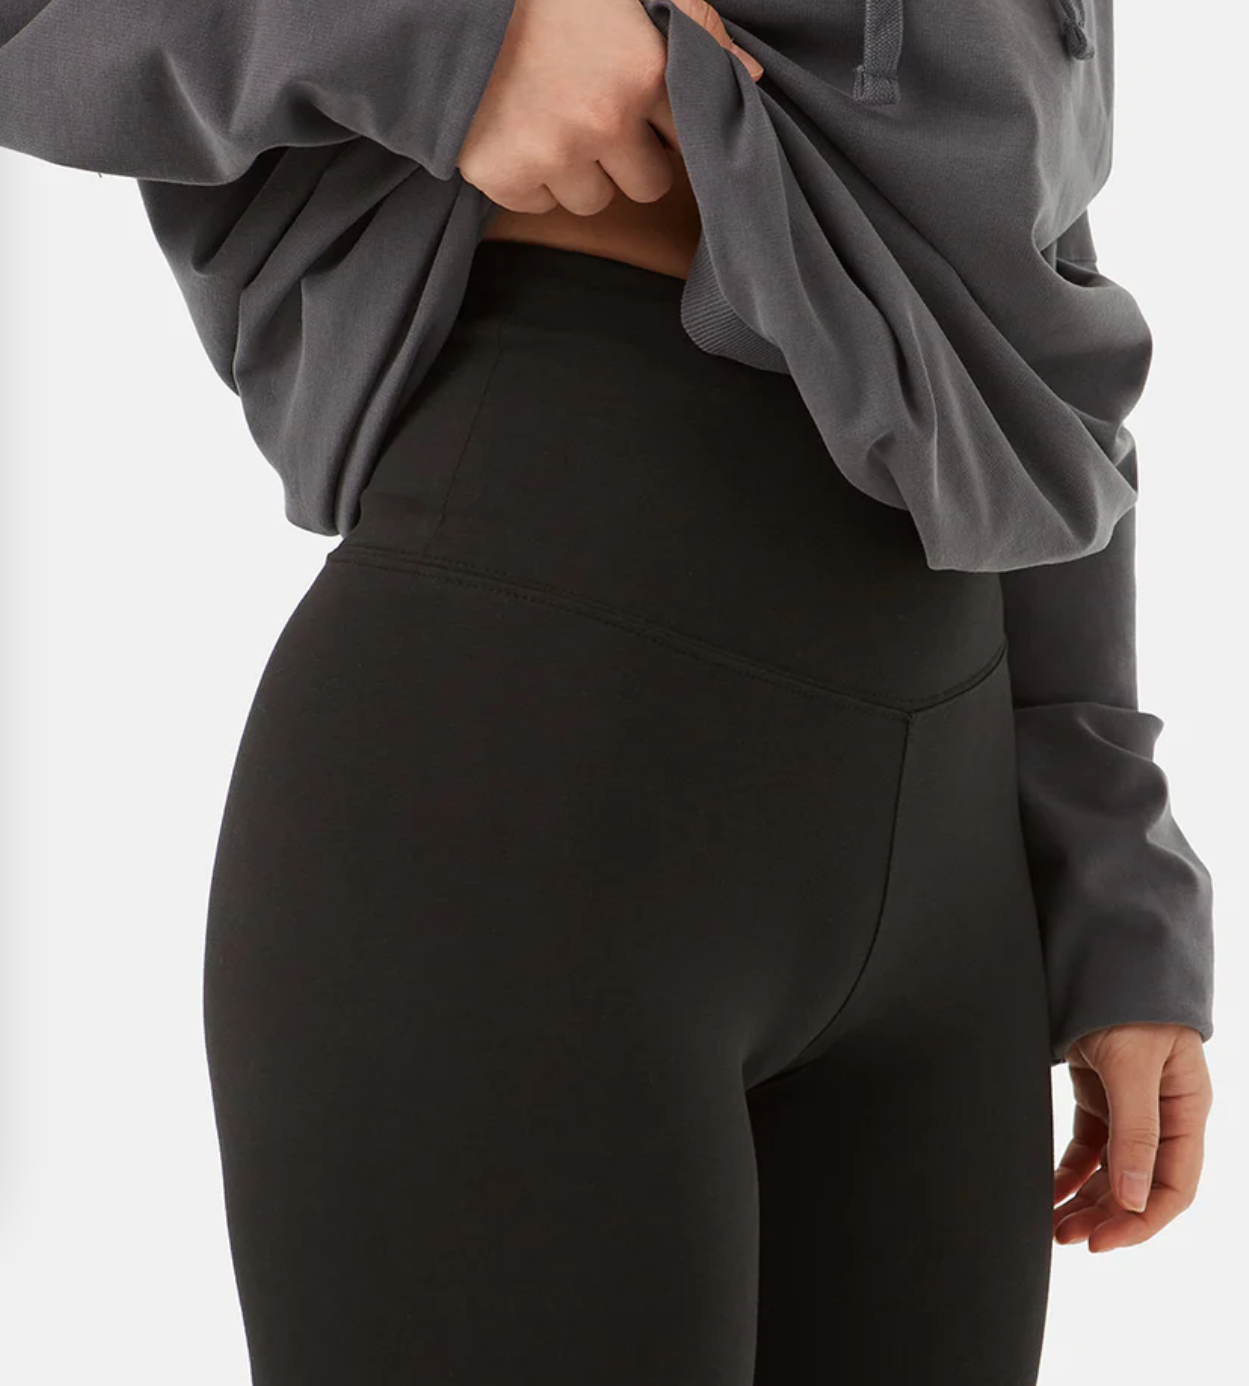 Non-Toxic Yoga Pants That Don't Make Me Itch - Ecocult